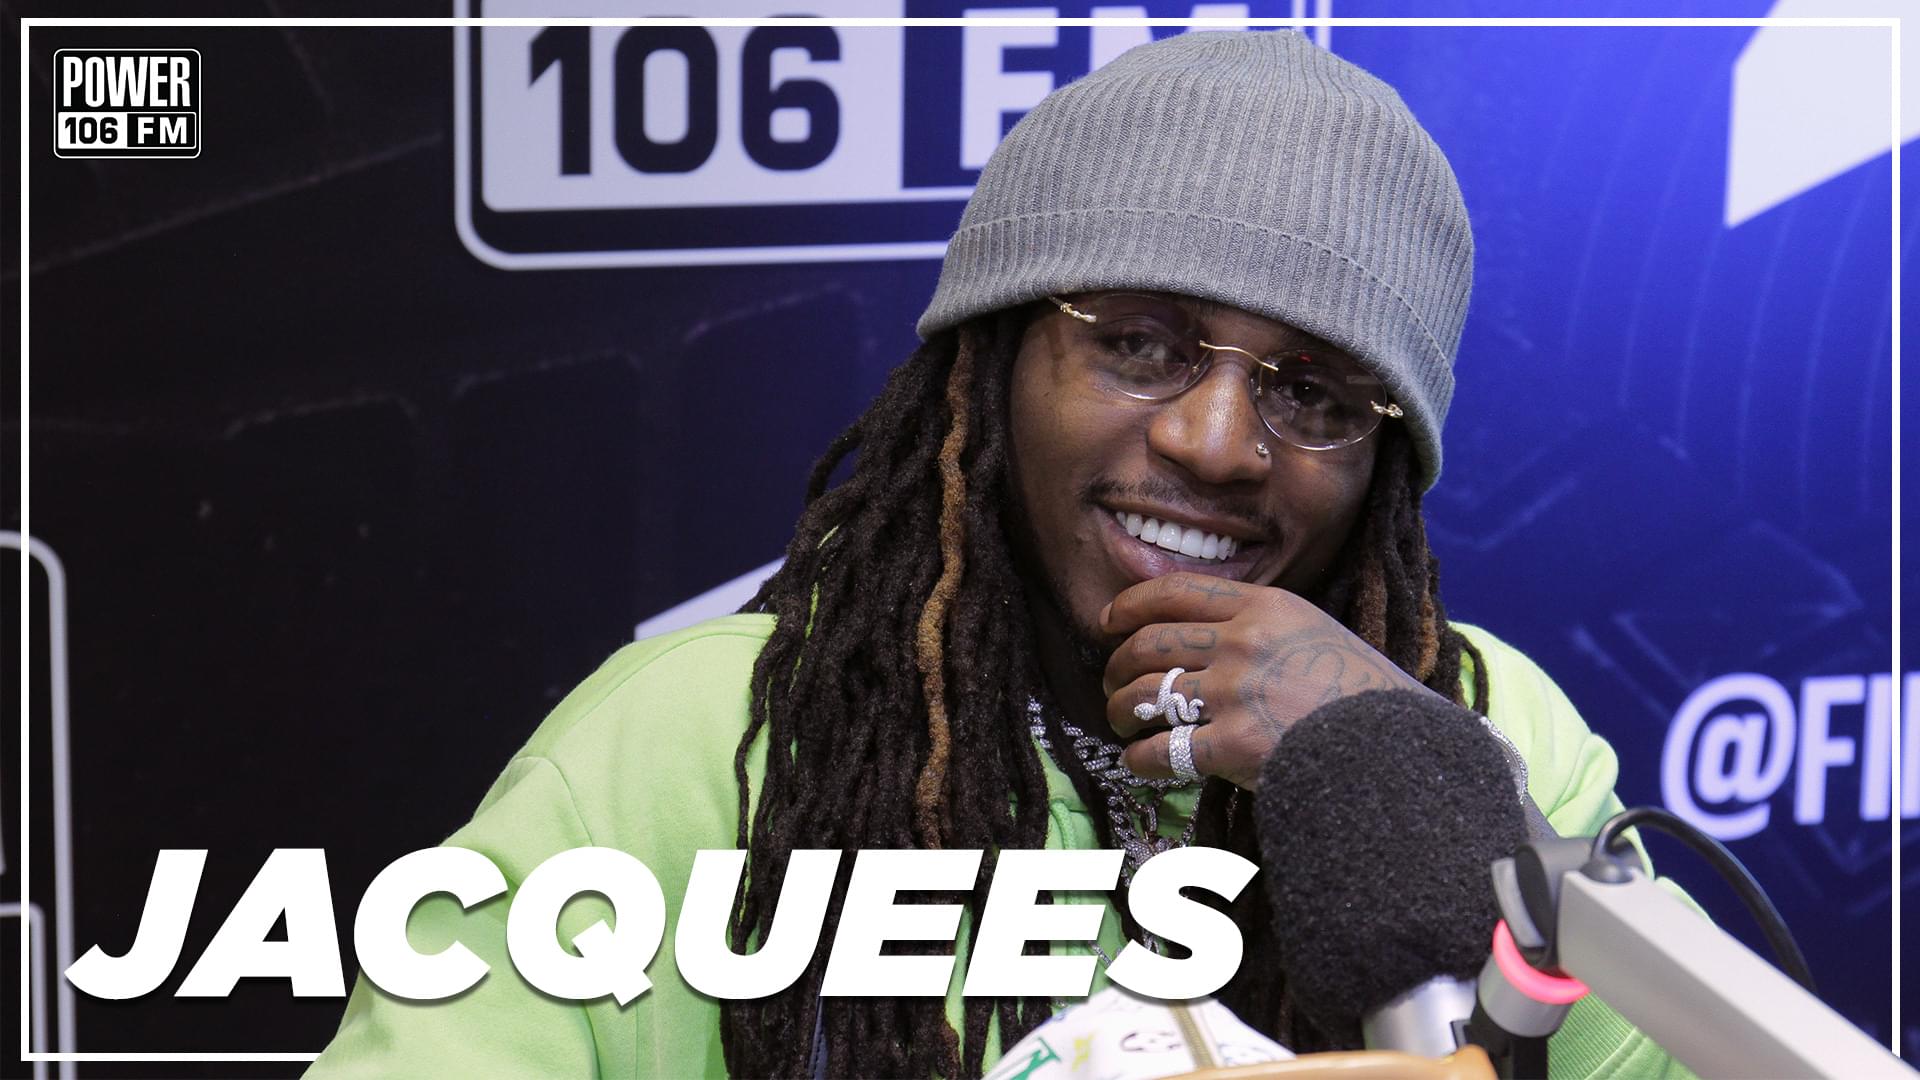 Jacquees Talks ‘Round 2’ Album Details, King Of R&B Advice Quavo Shared + Opinion On Michael Jackson